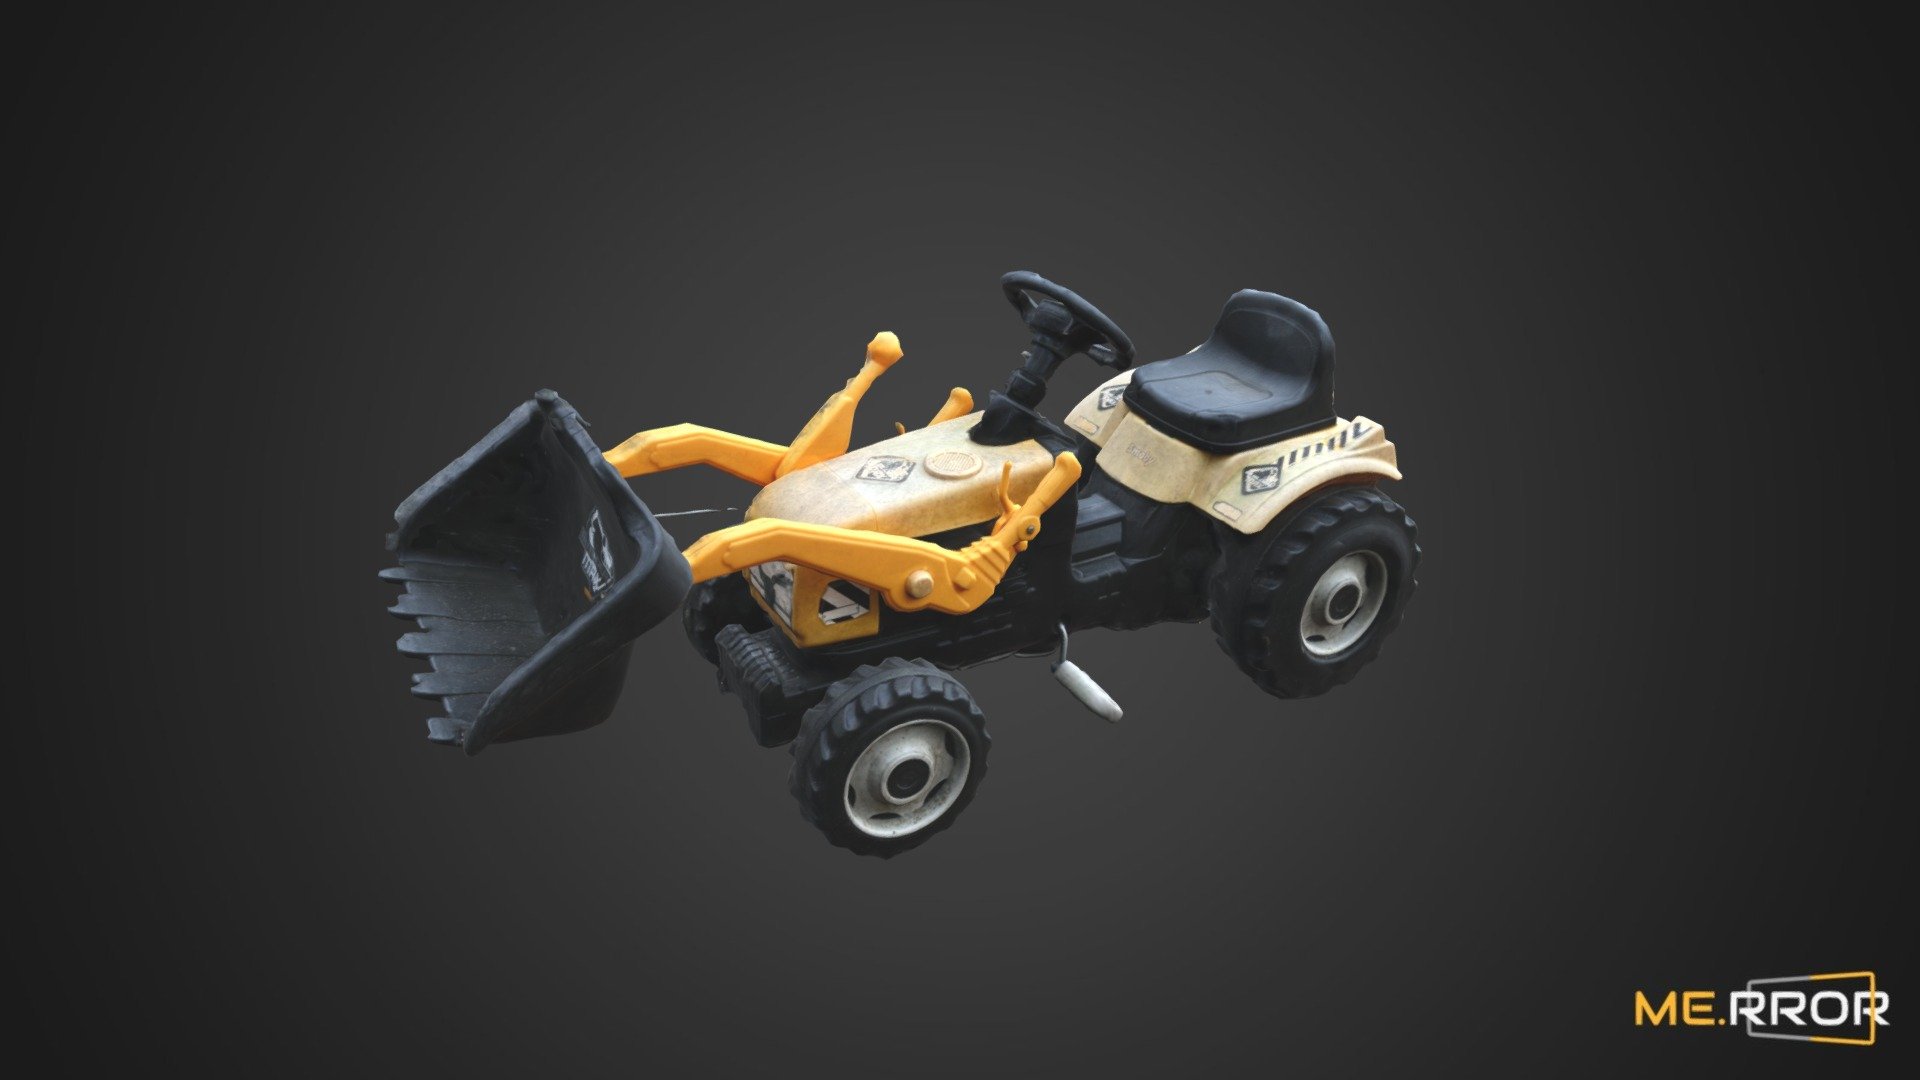 MERROR is a 3D Content PLATFORM which introduces various Asian assets to the 3D world


3DScanning #Photogrametry #ME.RROR - Toy Tractor - Buy Royalty Free 3D model by ME.RROR (@merror) 3d model